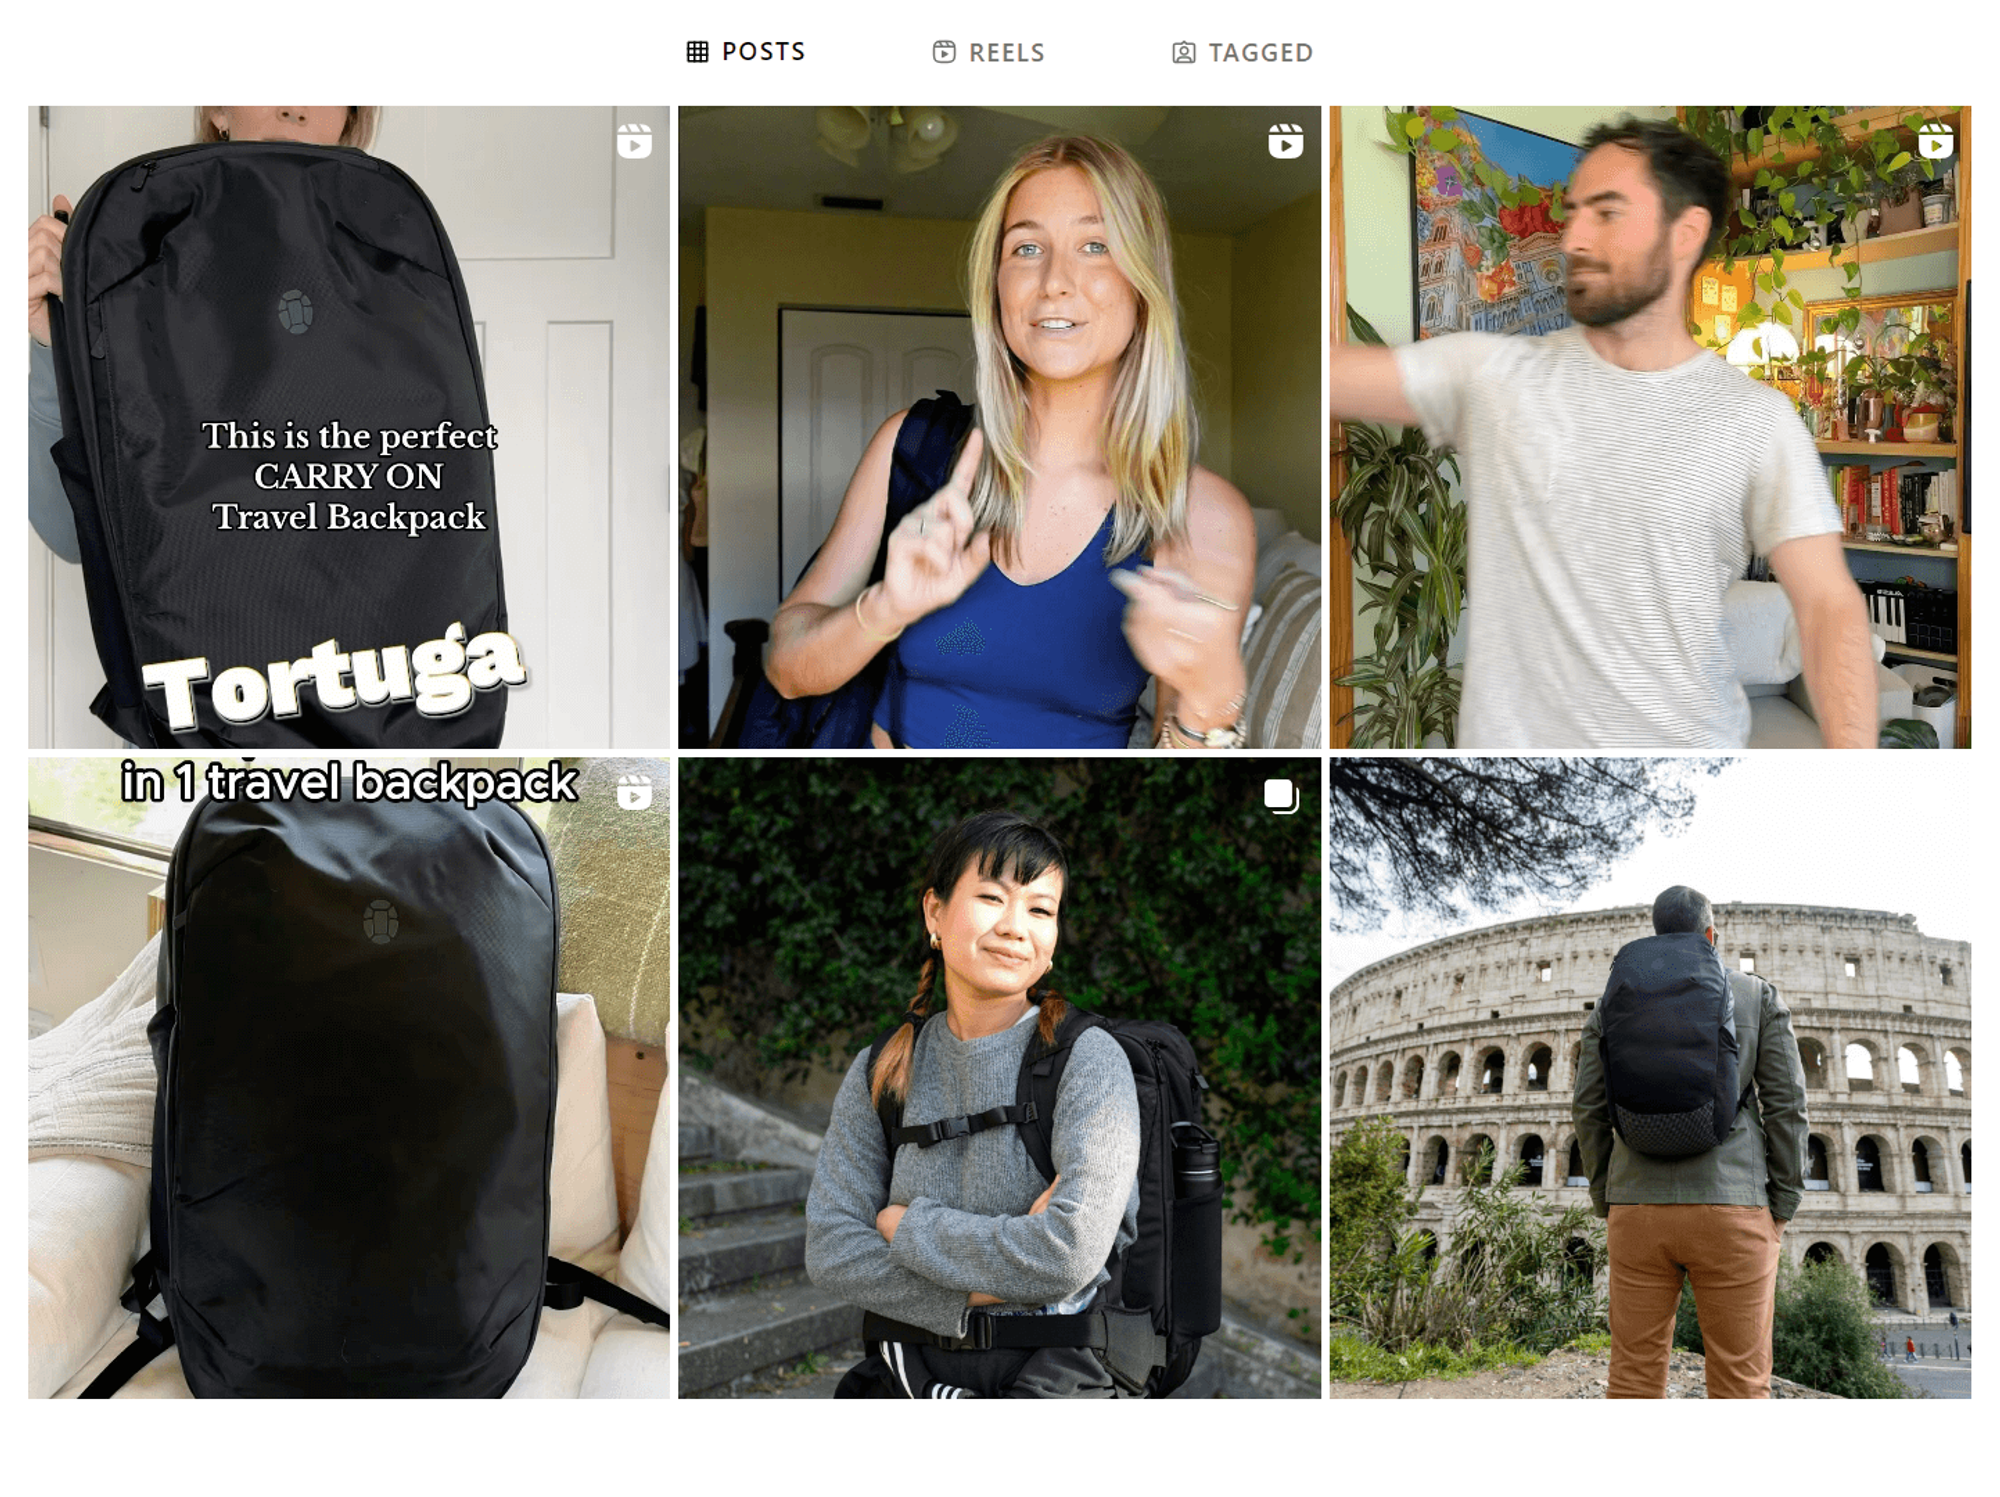 image 3Tortuga Backpack’s Instagram page featuring user-generated content